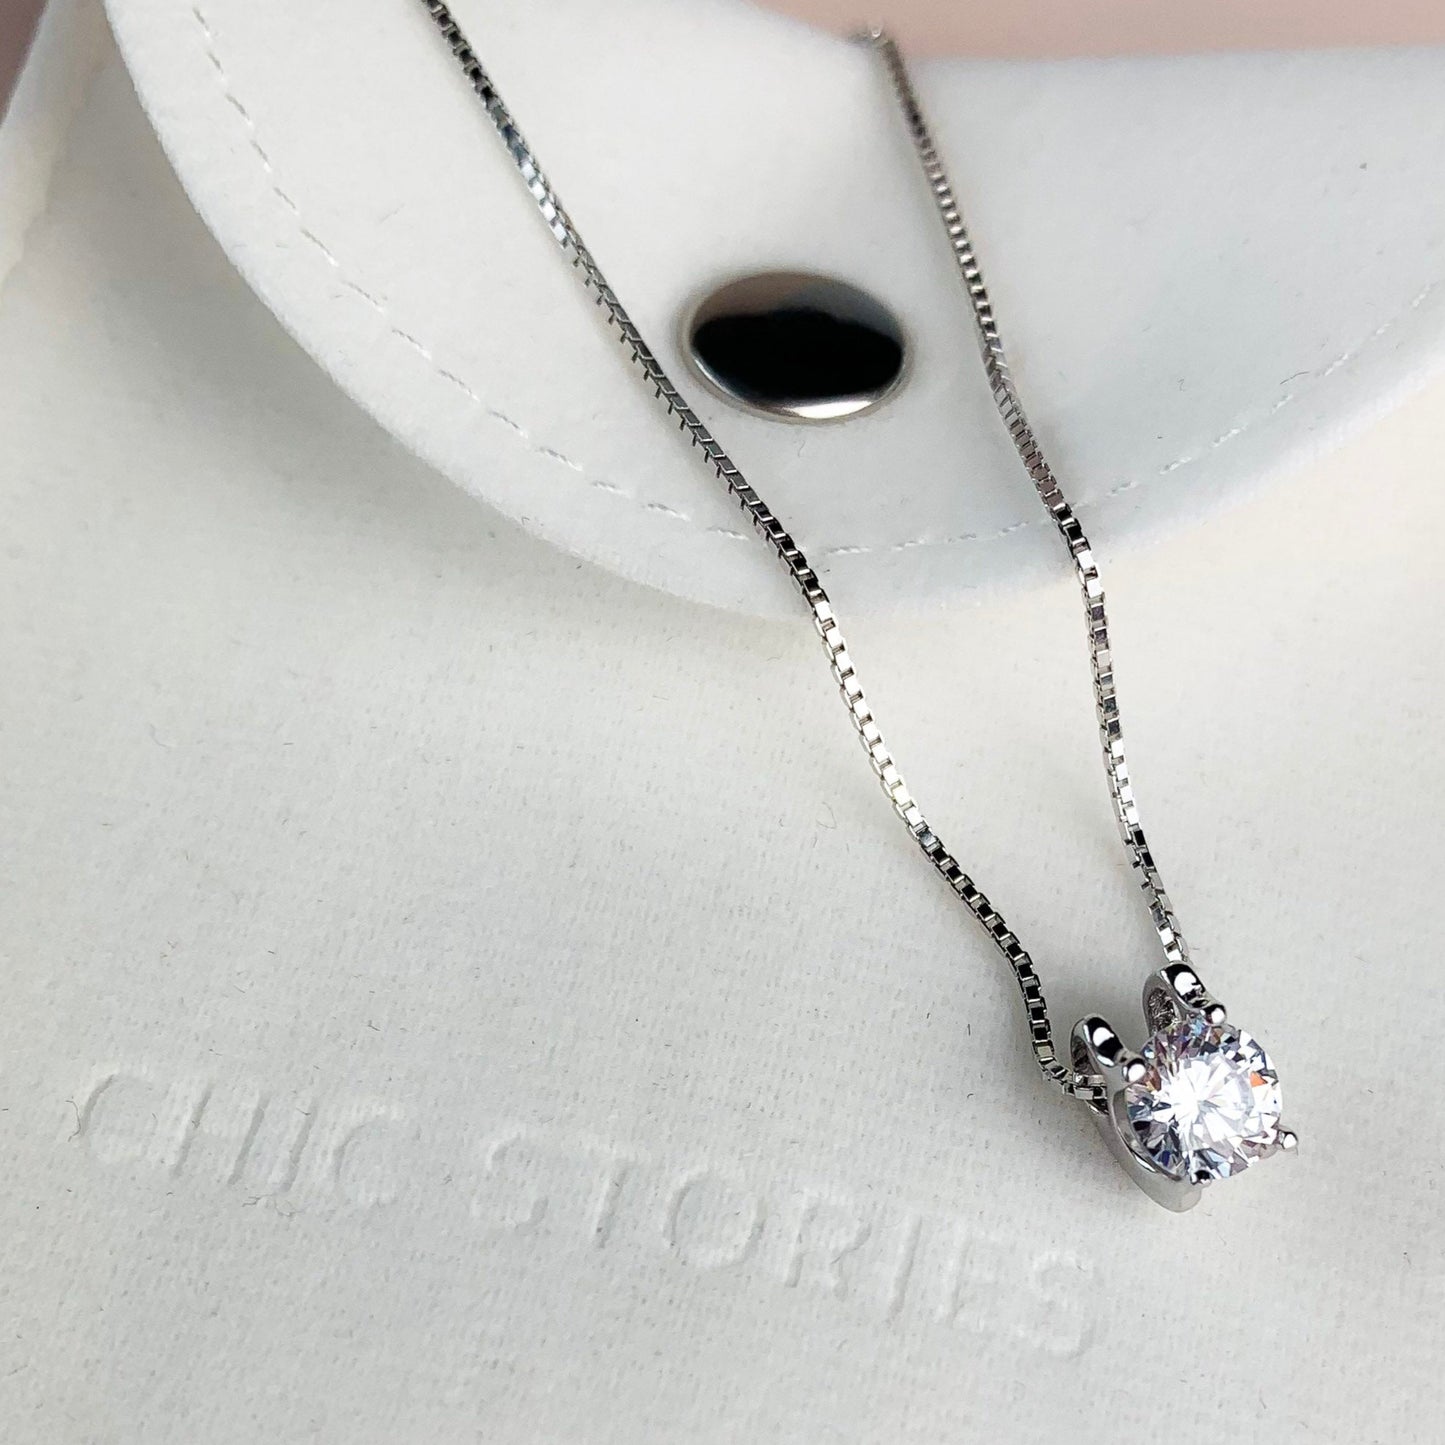 White Crystal Pendant Necklace